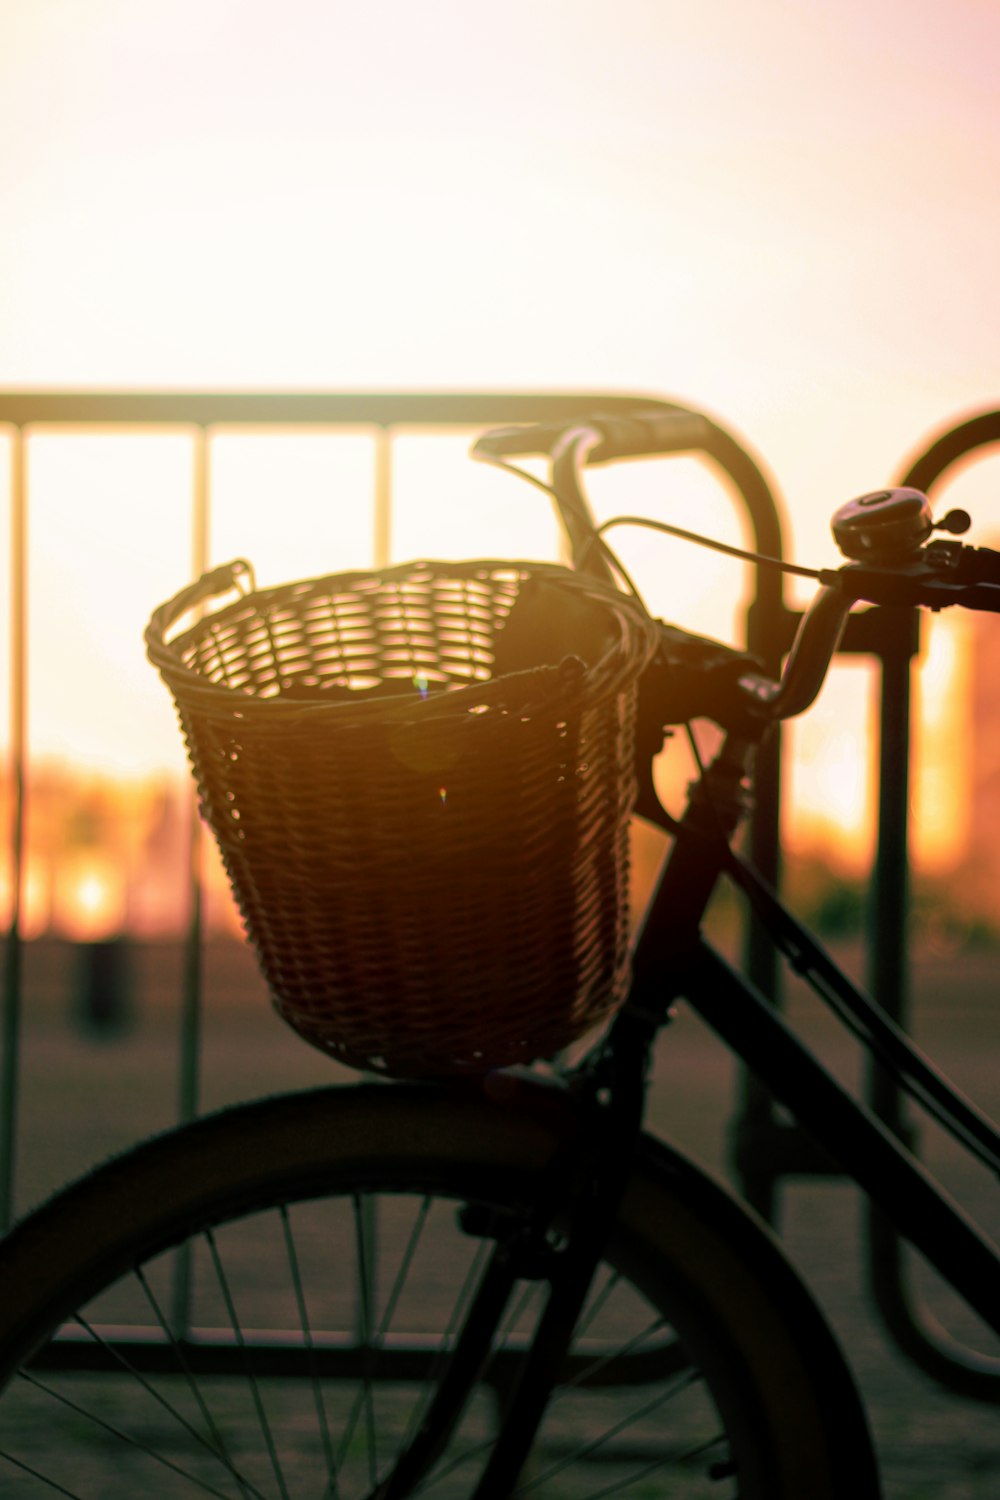 a basket on a bicycle